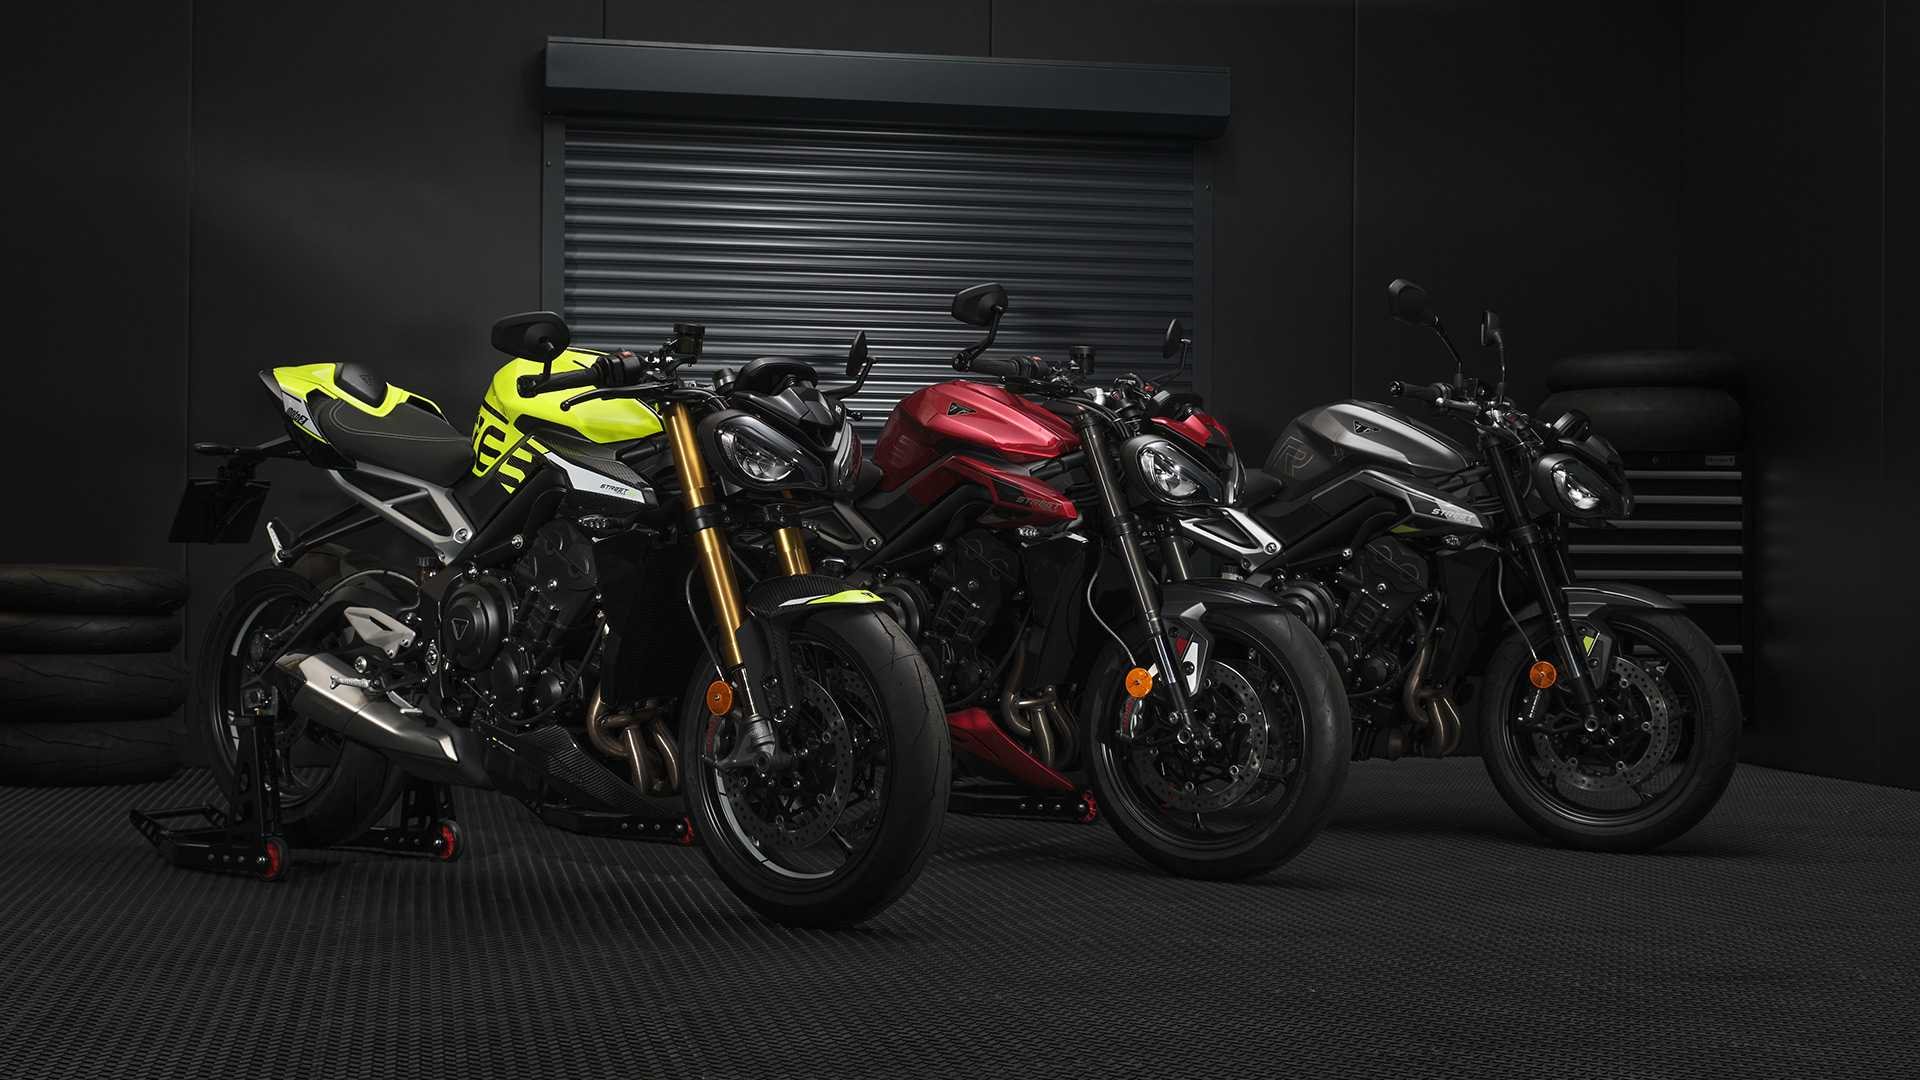 THE ALL-NEW STREET TRIPLE 765